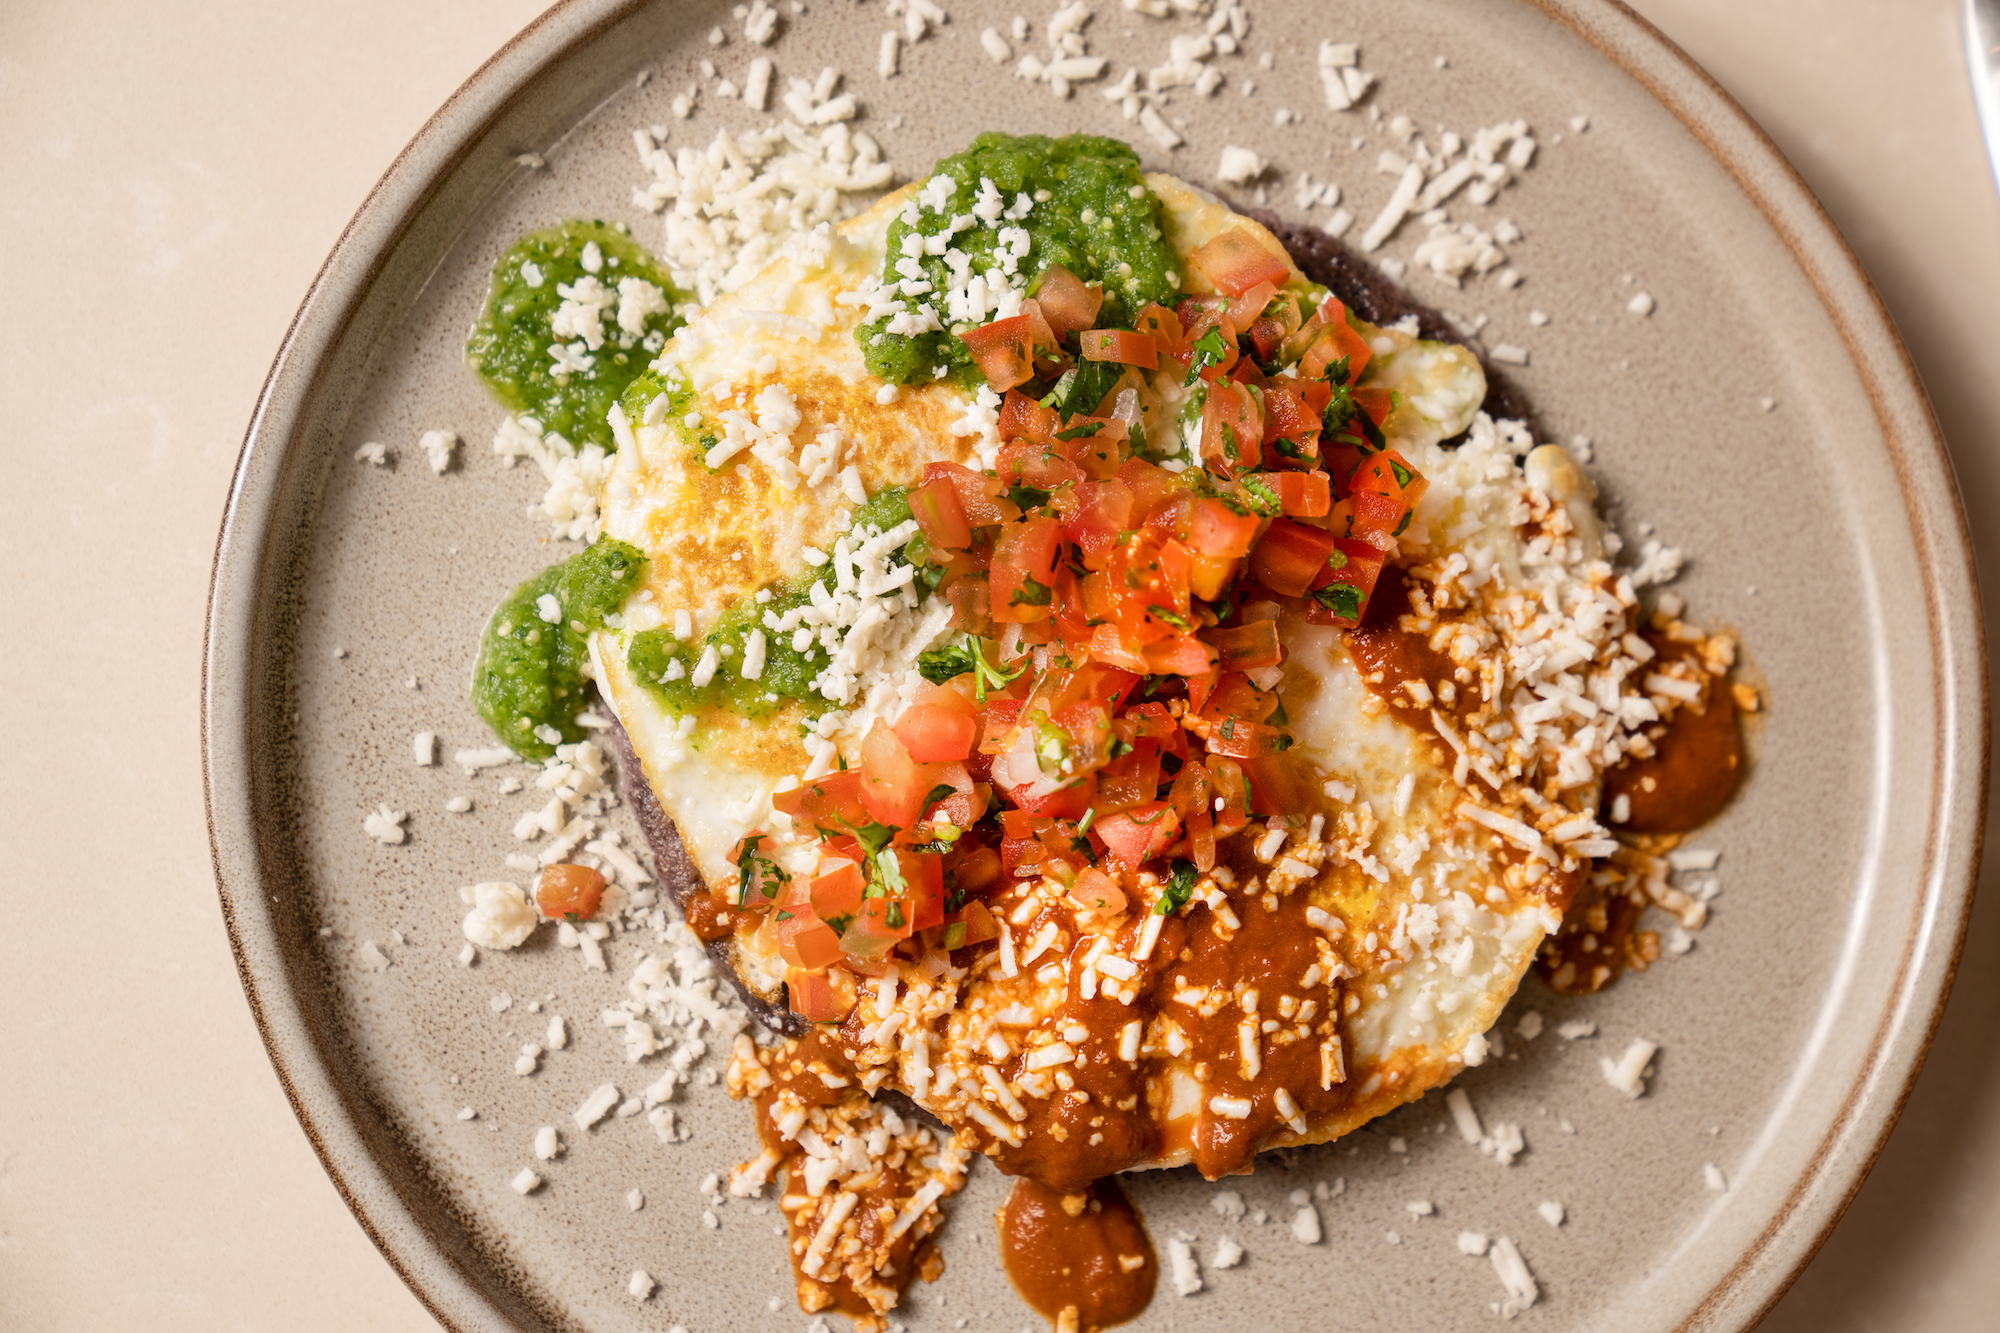 A chilaquiles with cheese on a tan plate